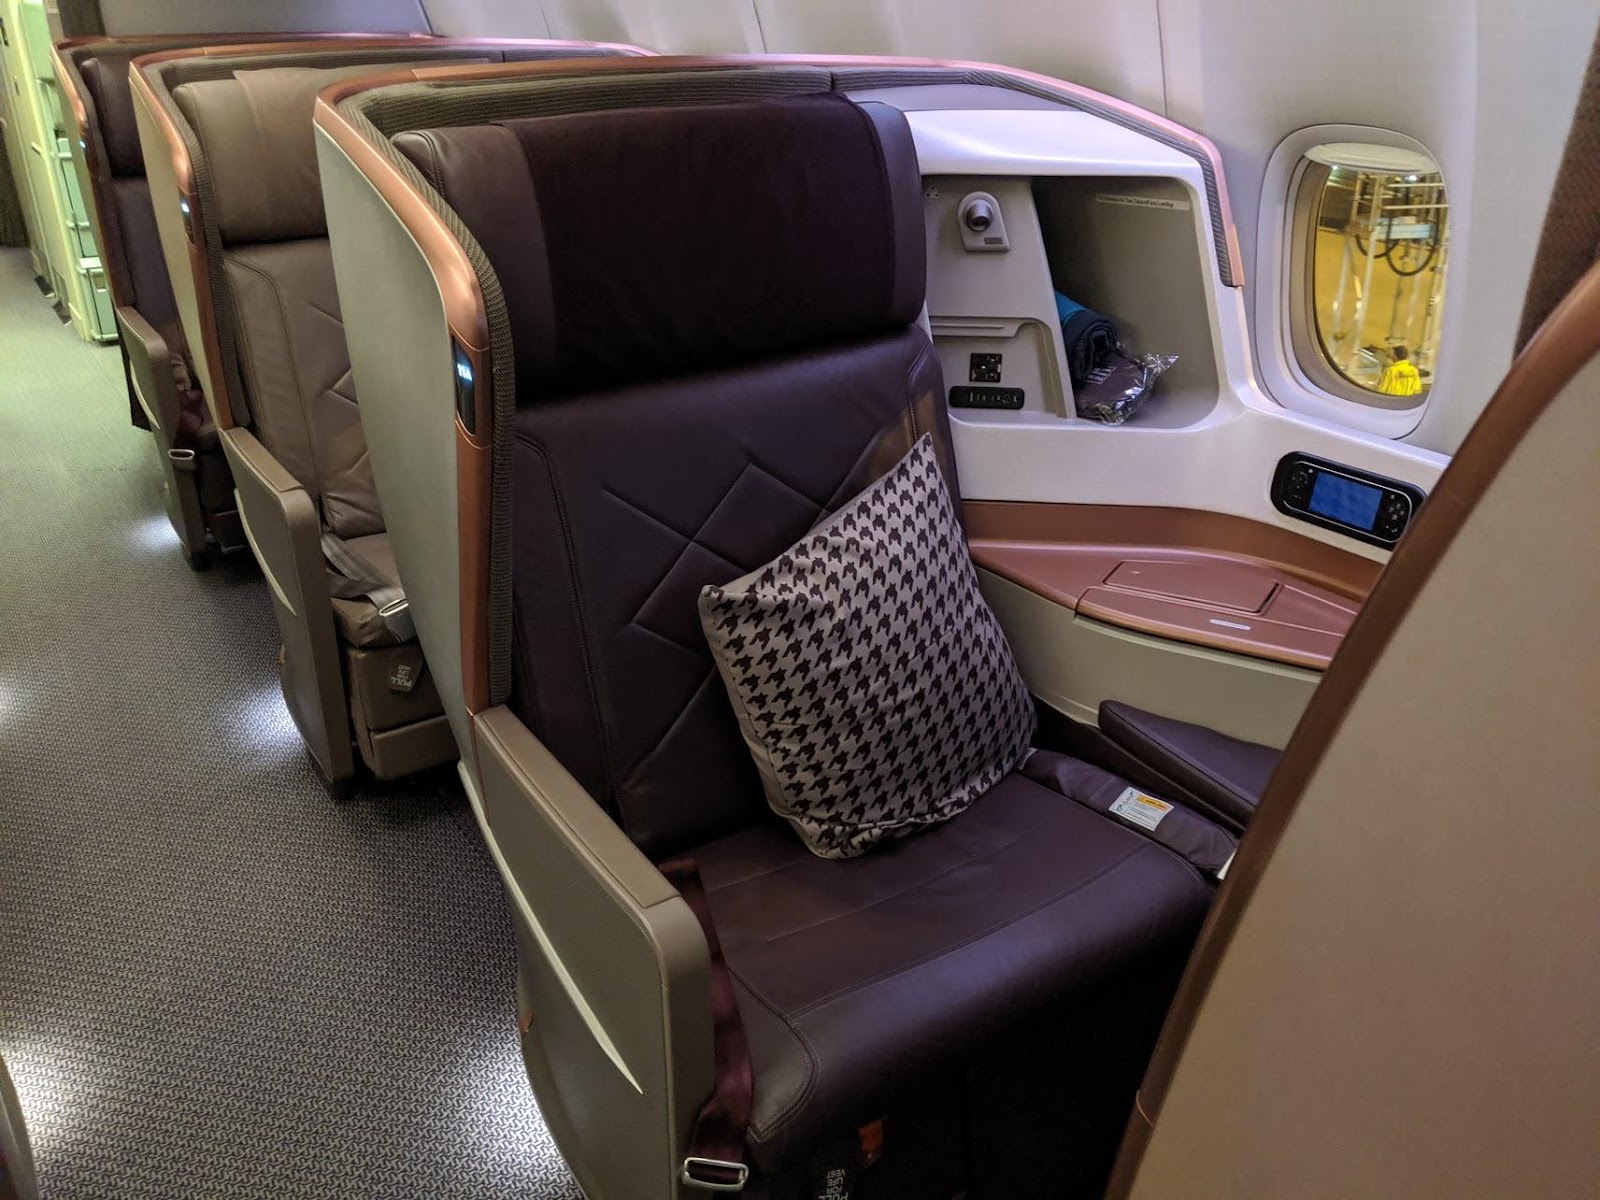 Singapore Airlines Business Class - Seat 11A